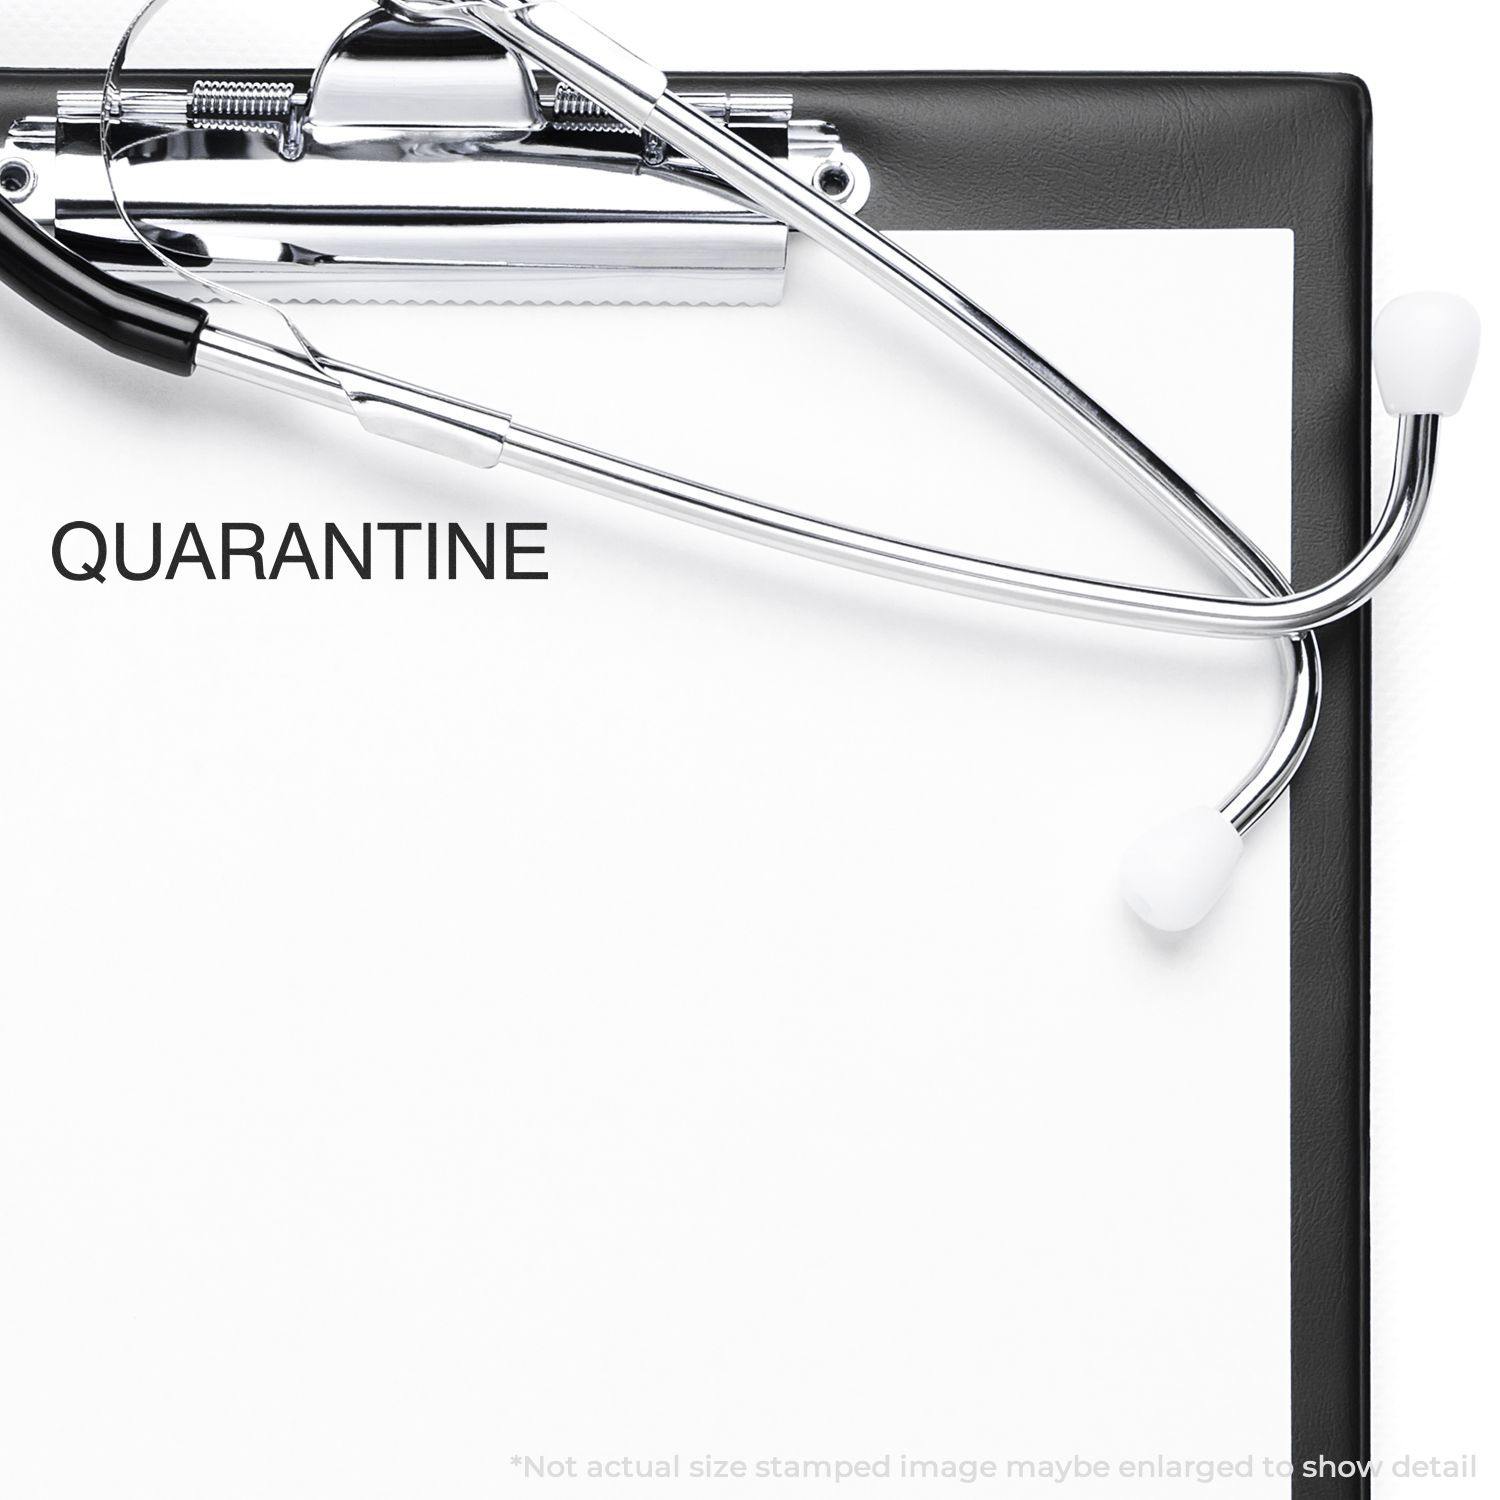 A stock office rubber stamp with a stamped image showing how the text "QUARANTINE" is displayed after stamping.